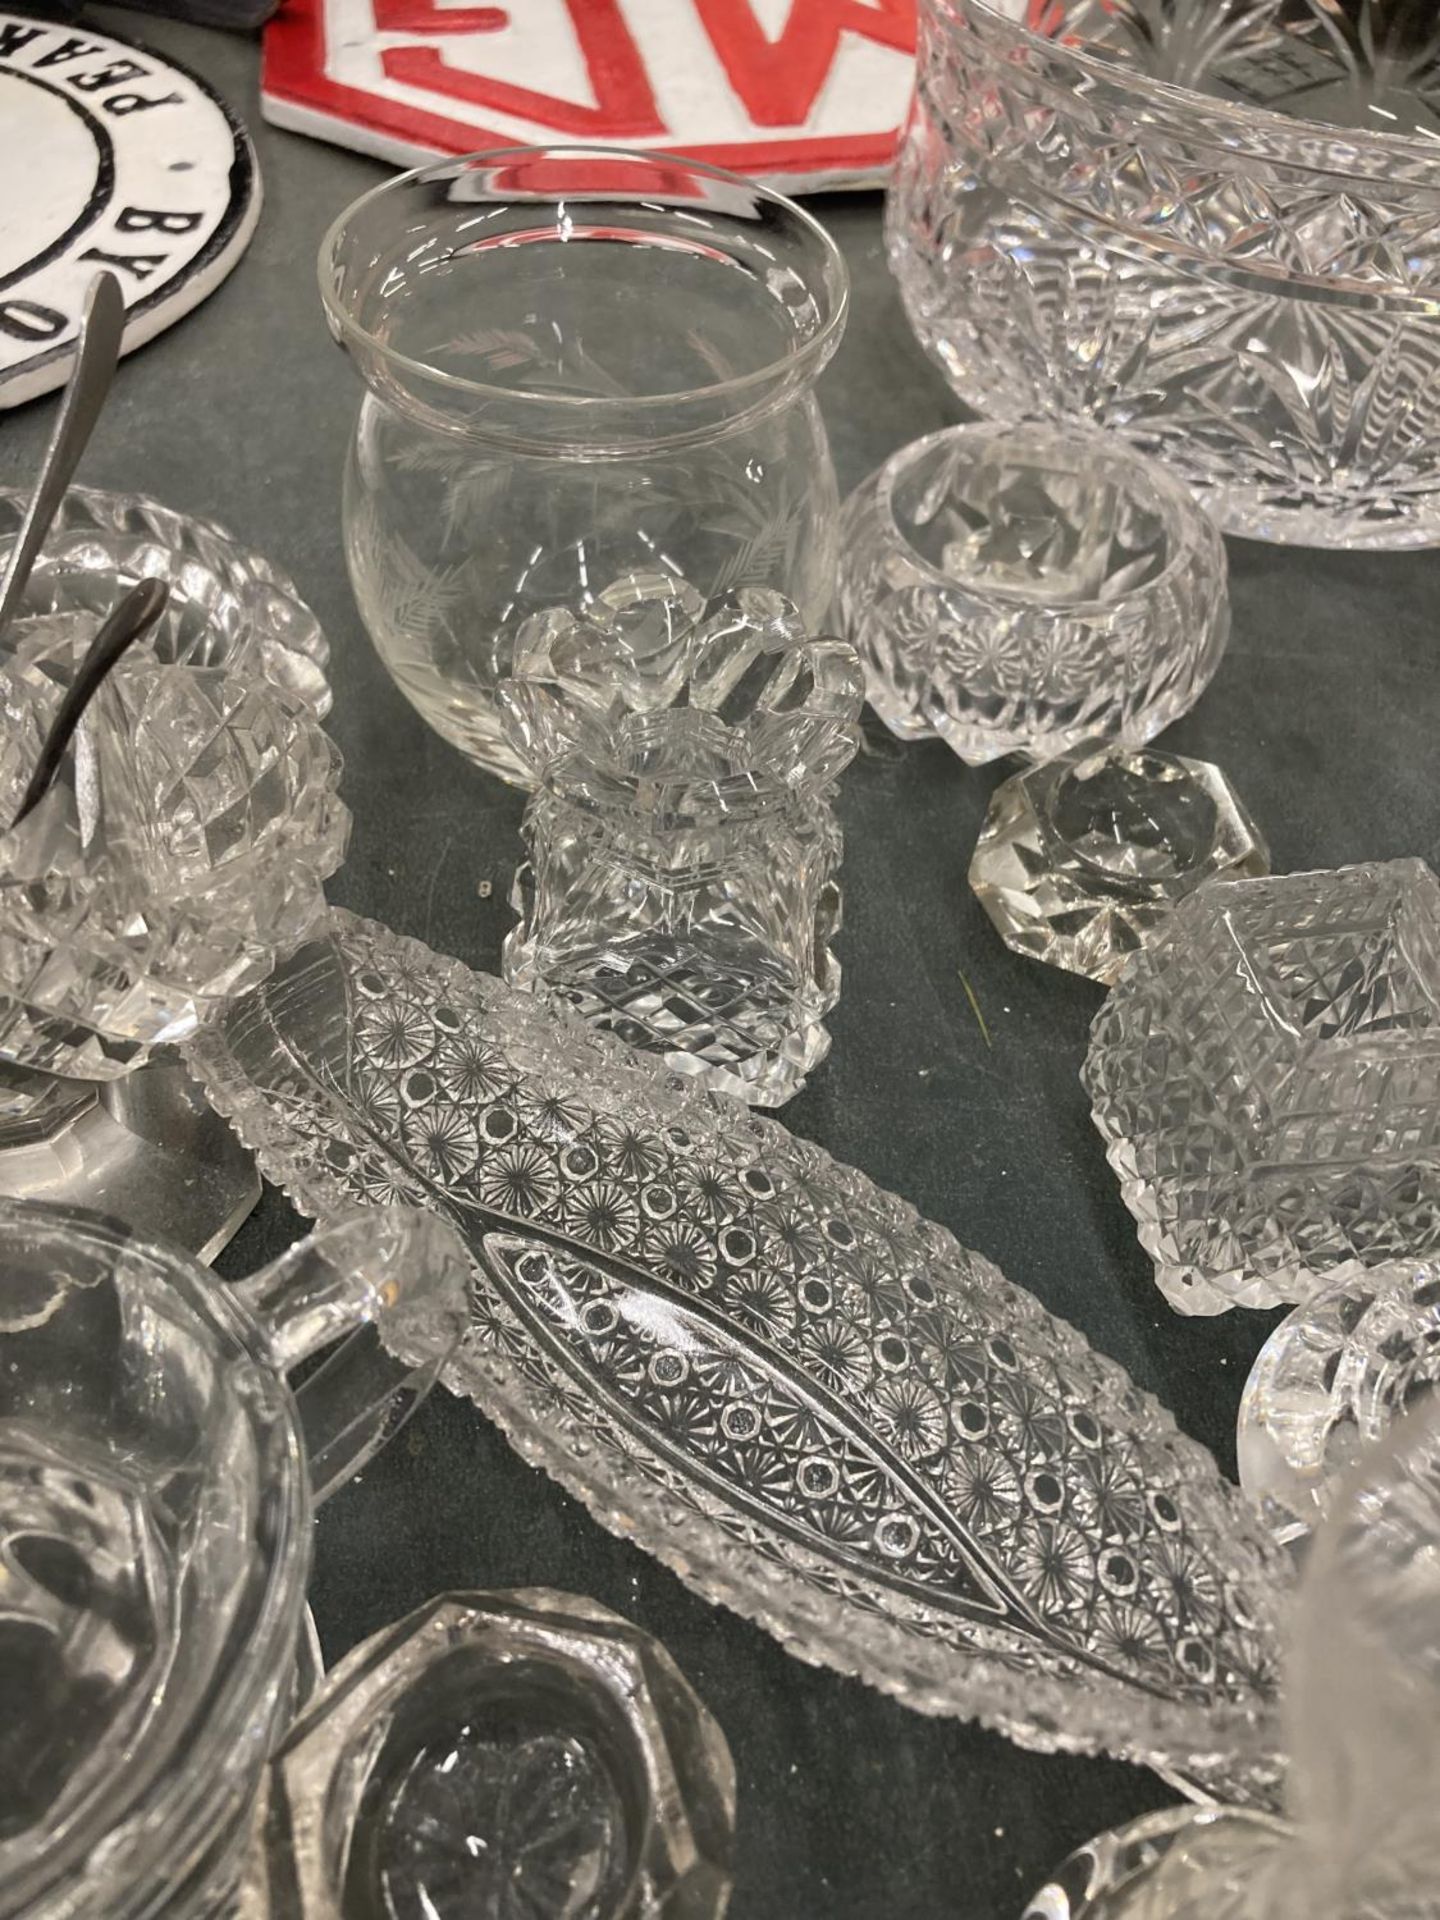 A LARGE QUANTITY OF GLASSWARE TO INCLUDE BOWLS, JUGS, VASES, ETC - Image 3 of 6